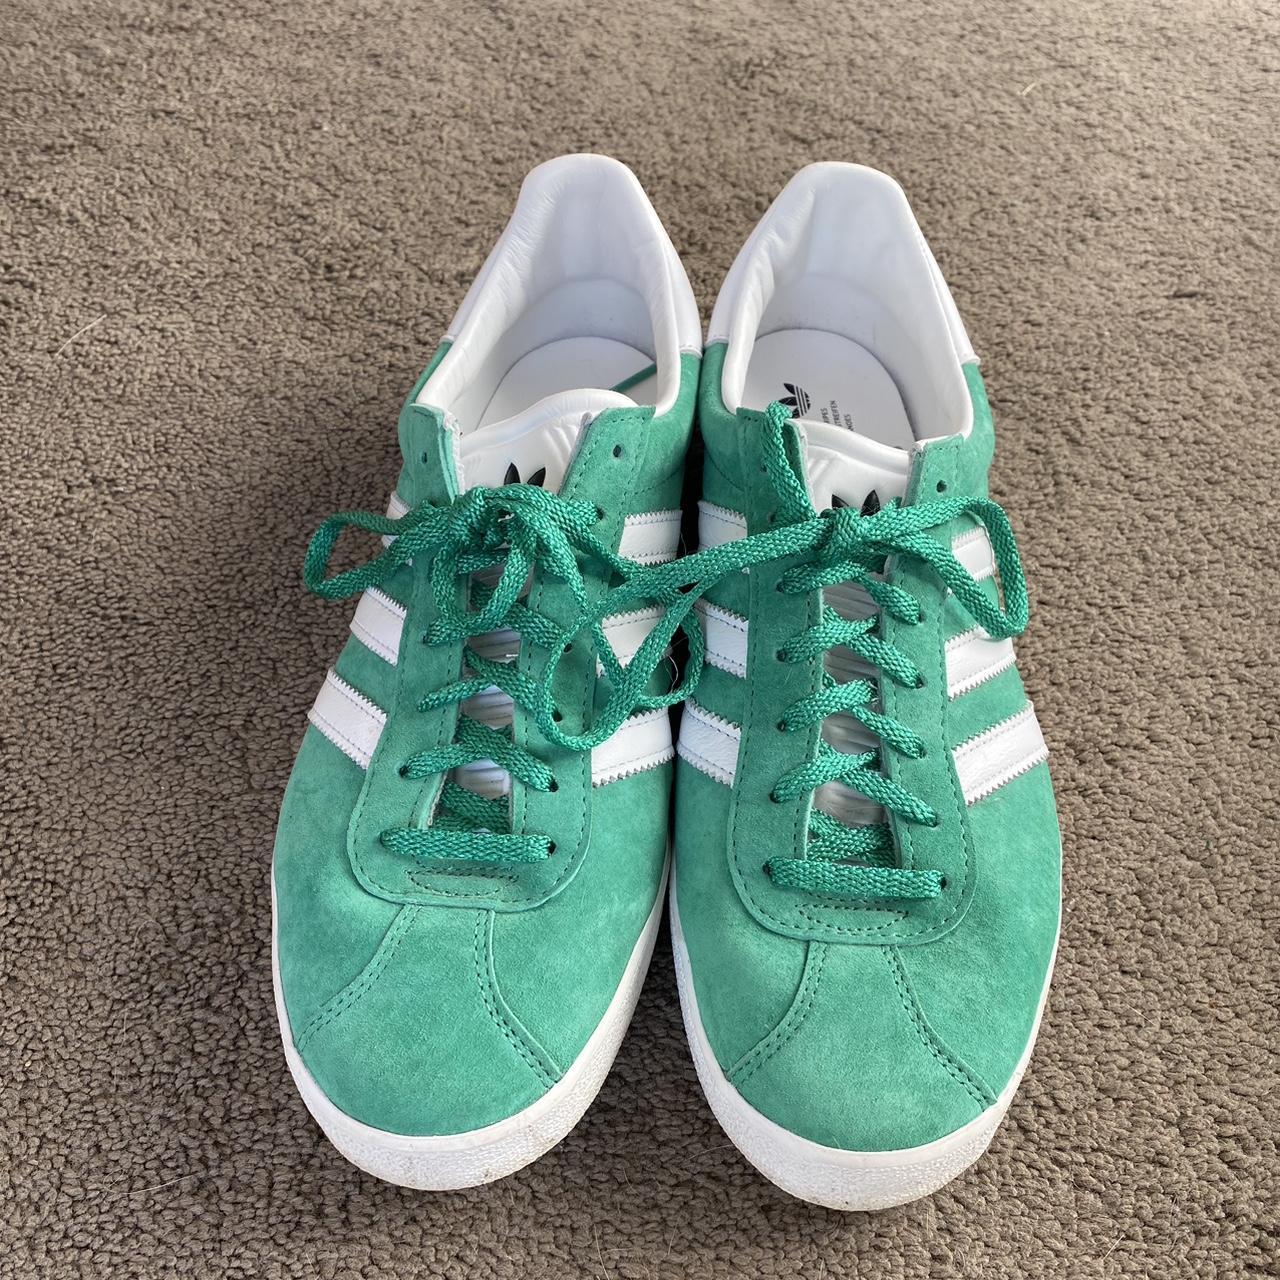 Adidas gazelle in green and white Not getting... - Depop